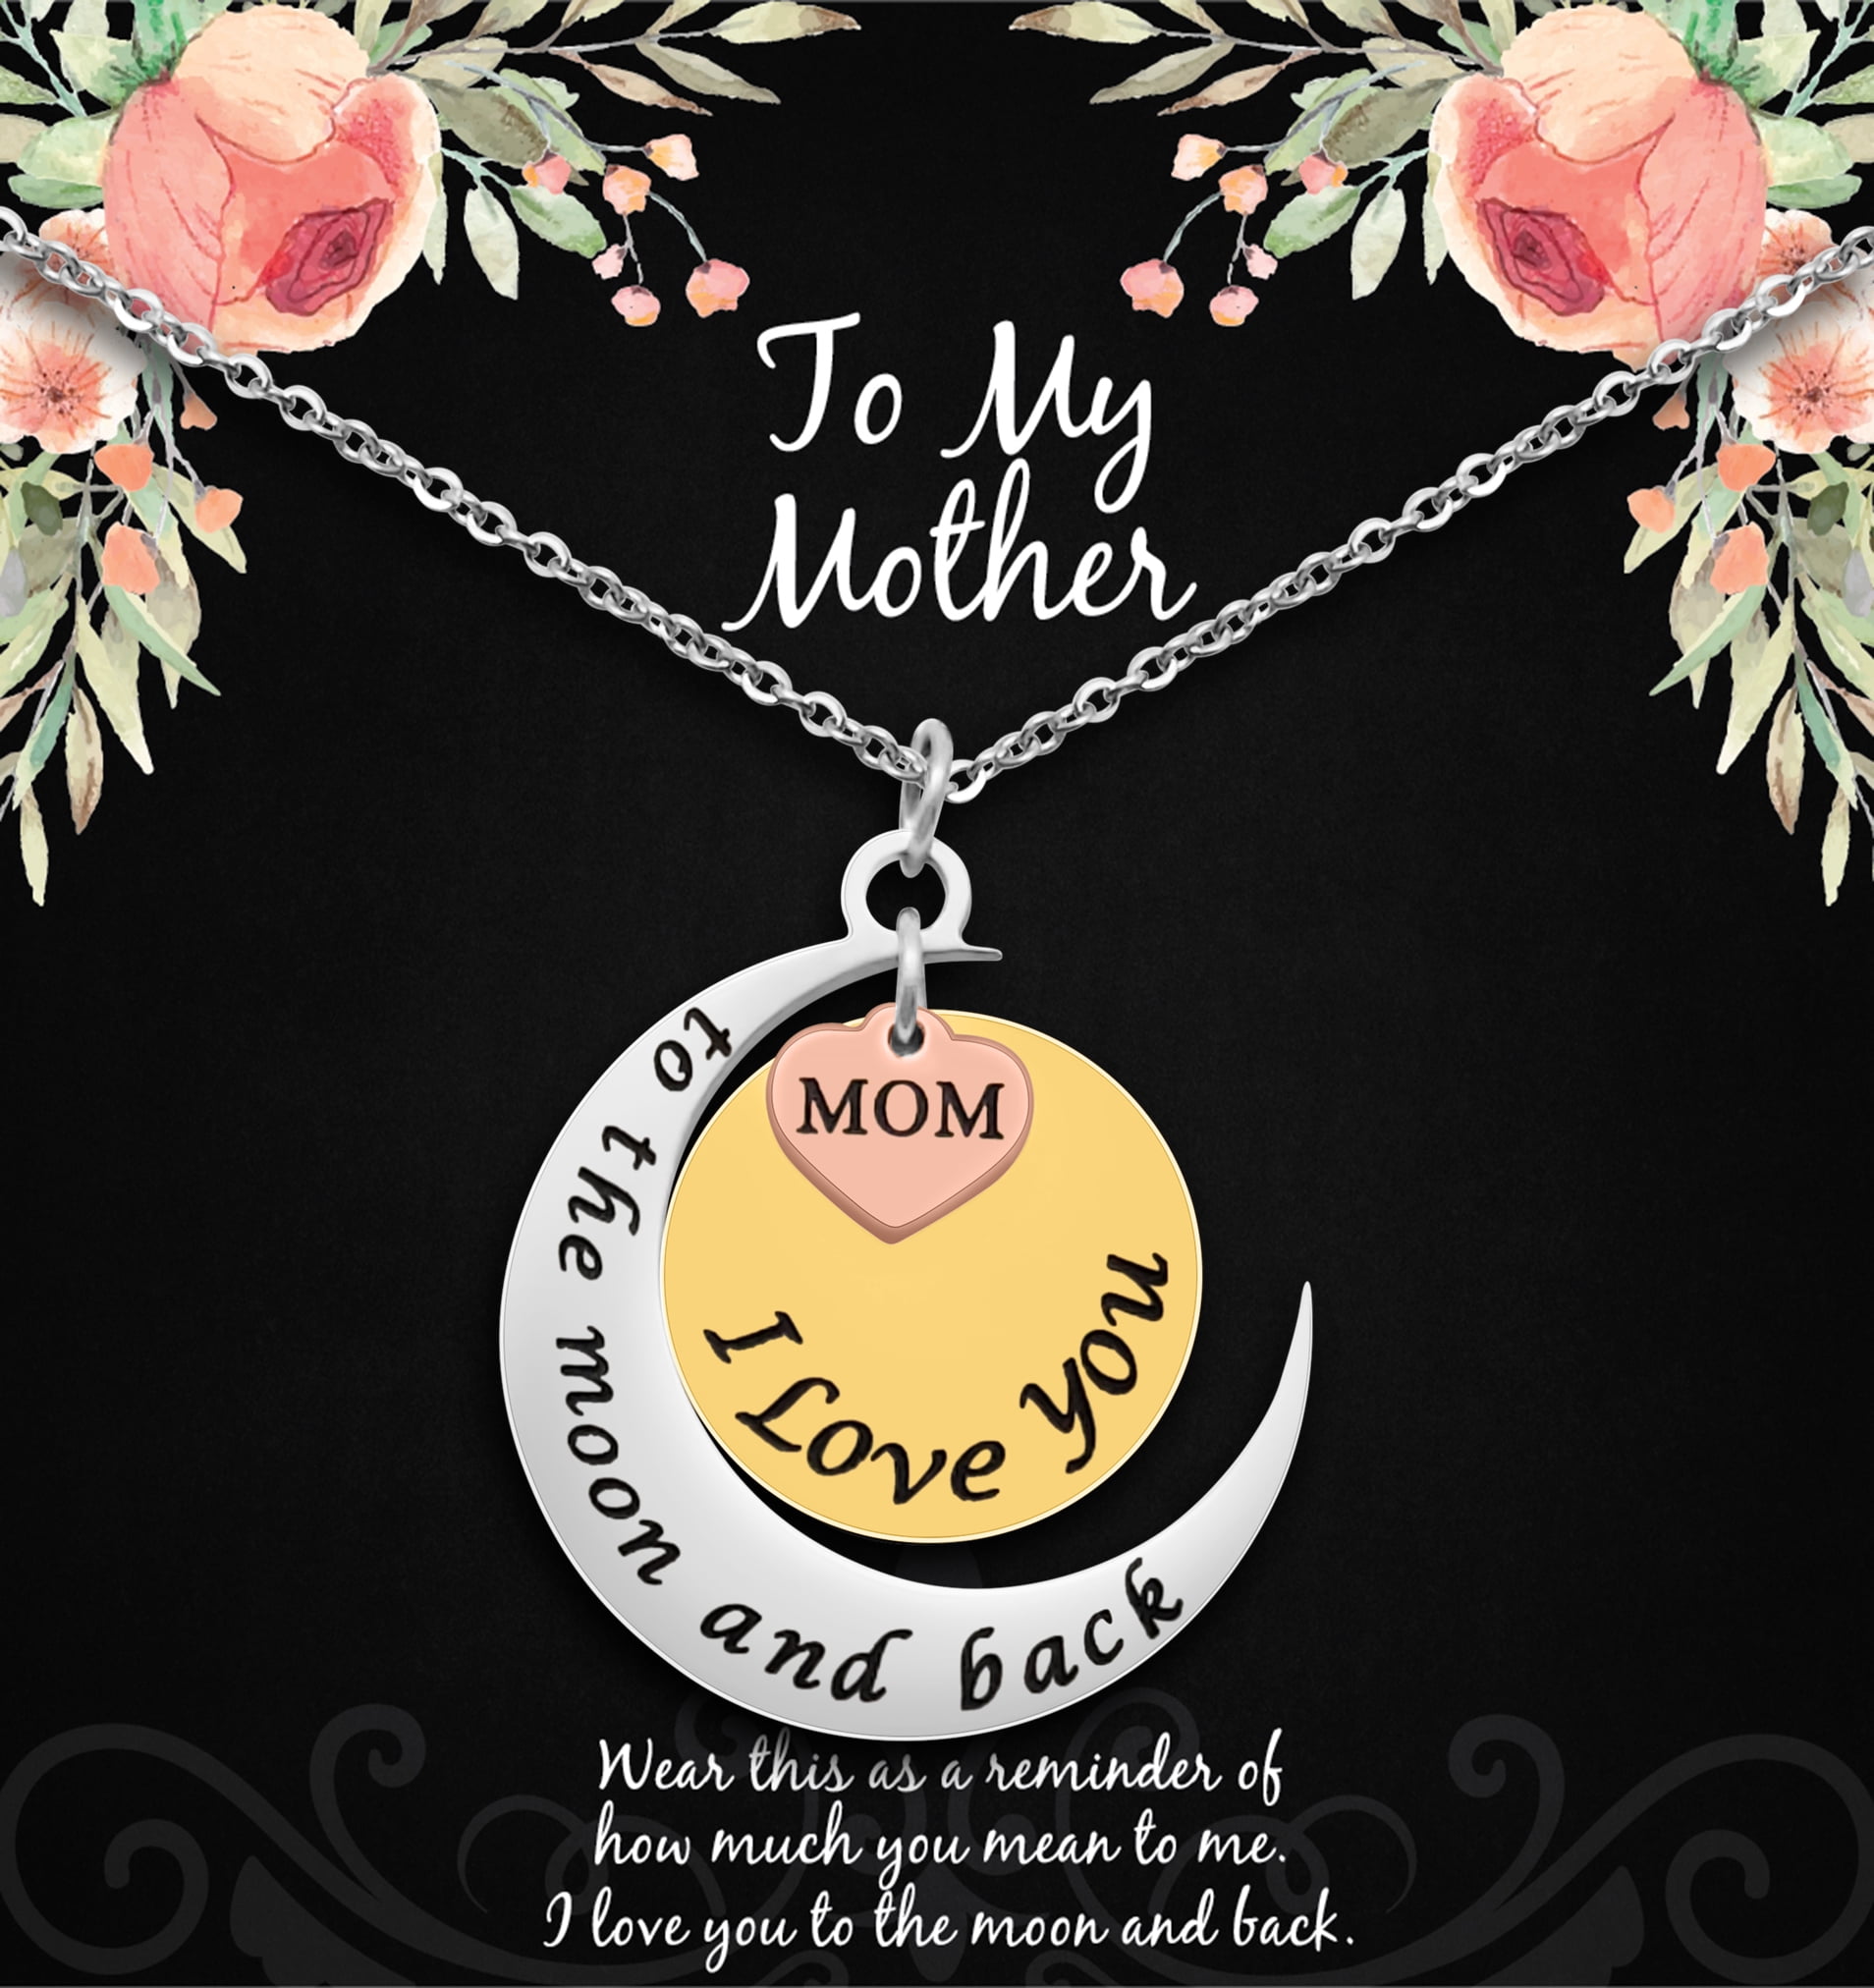 I Love You To the moon and back Engraved Pendant Necklace Mum Daughter Xmas Gift 